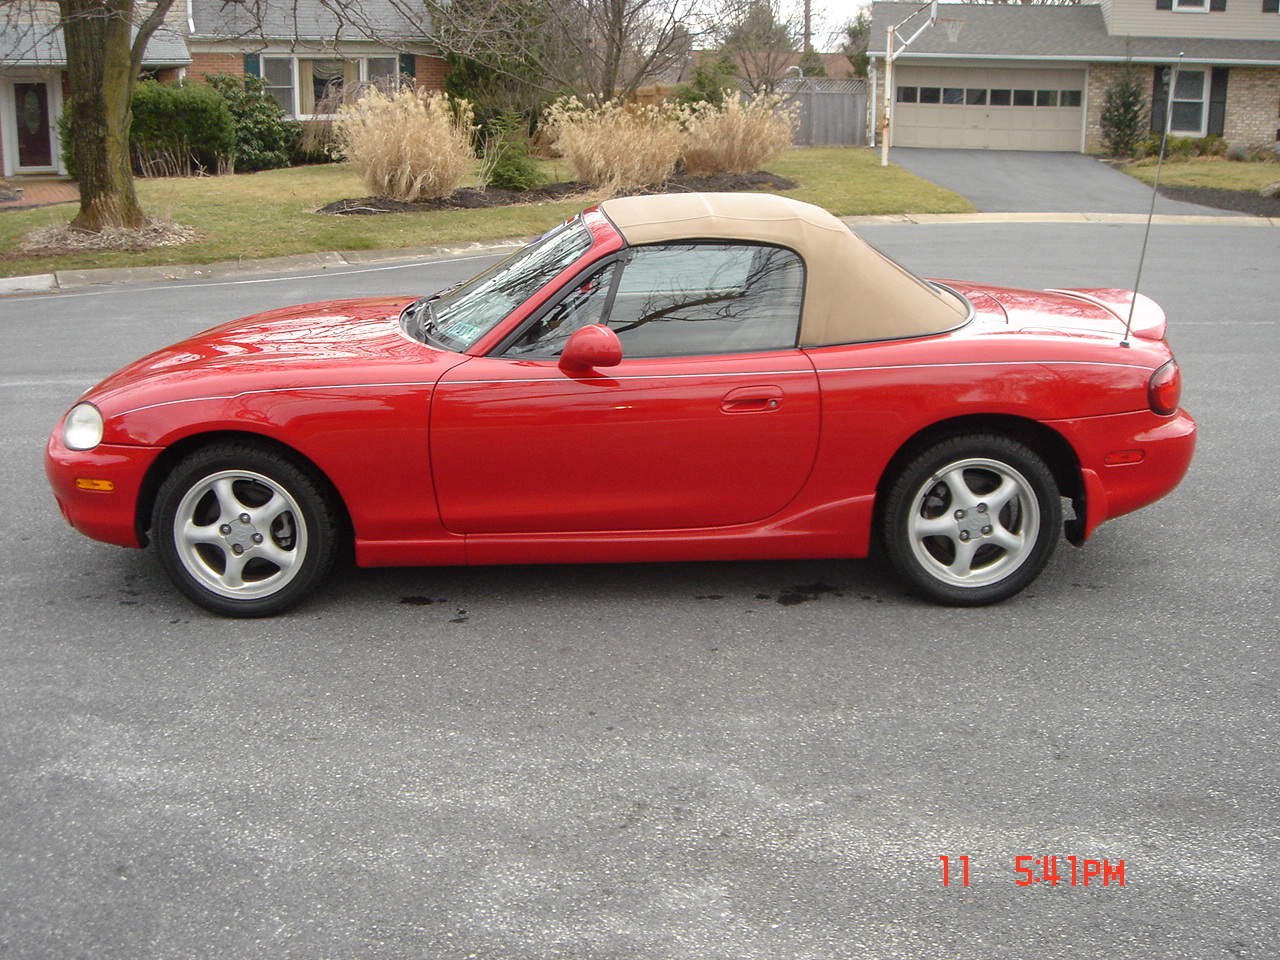 Mazda MX-5 1999: Review, Amazing Pictures and Images - Look at the car